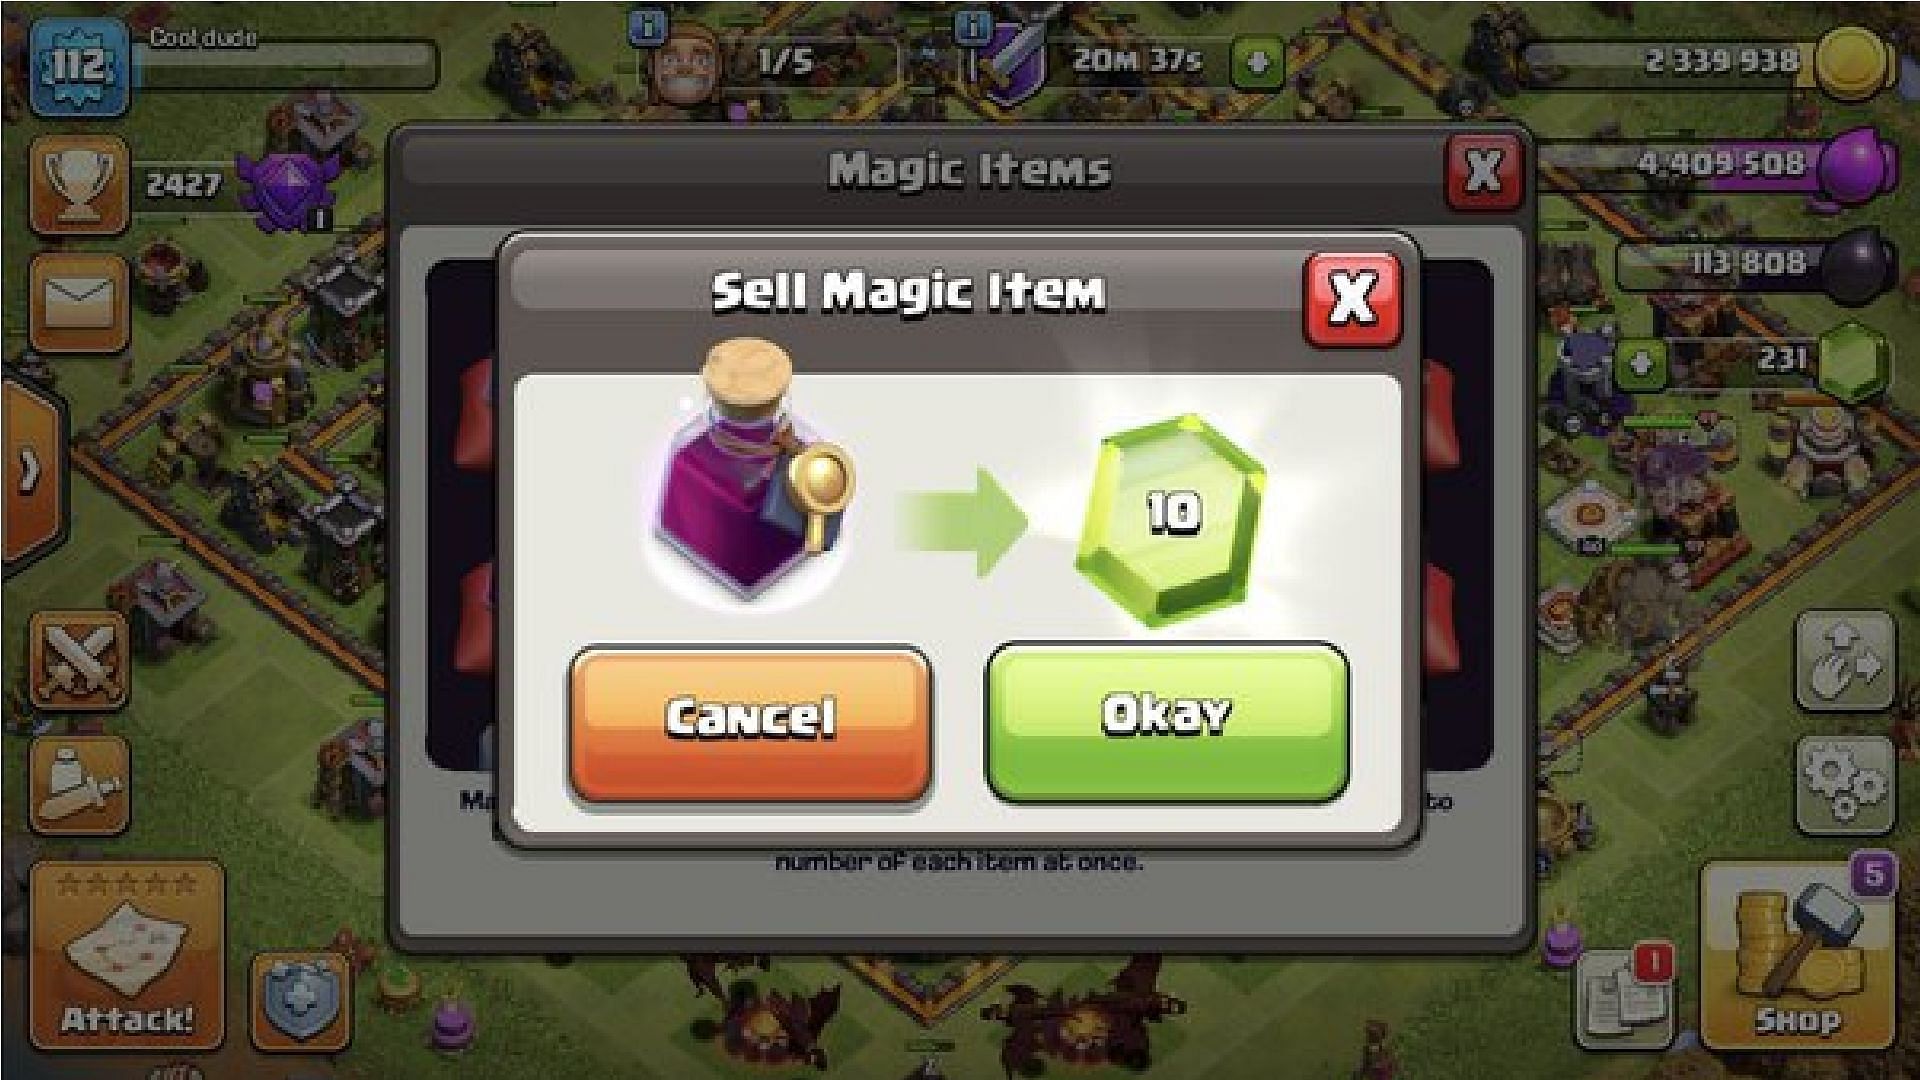 Sell the Magic Items for free gems (Image via Supercell)